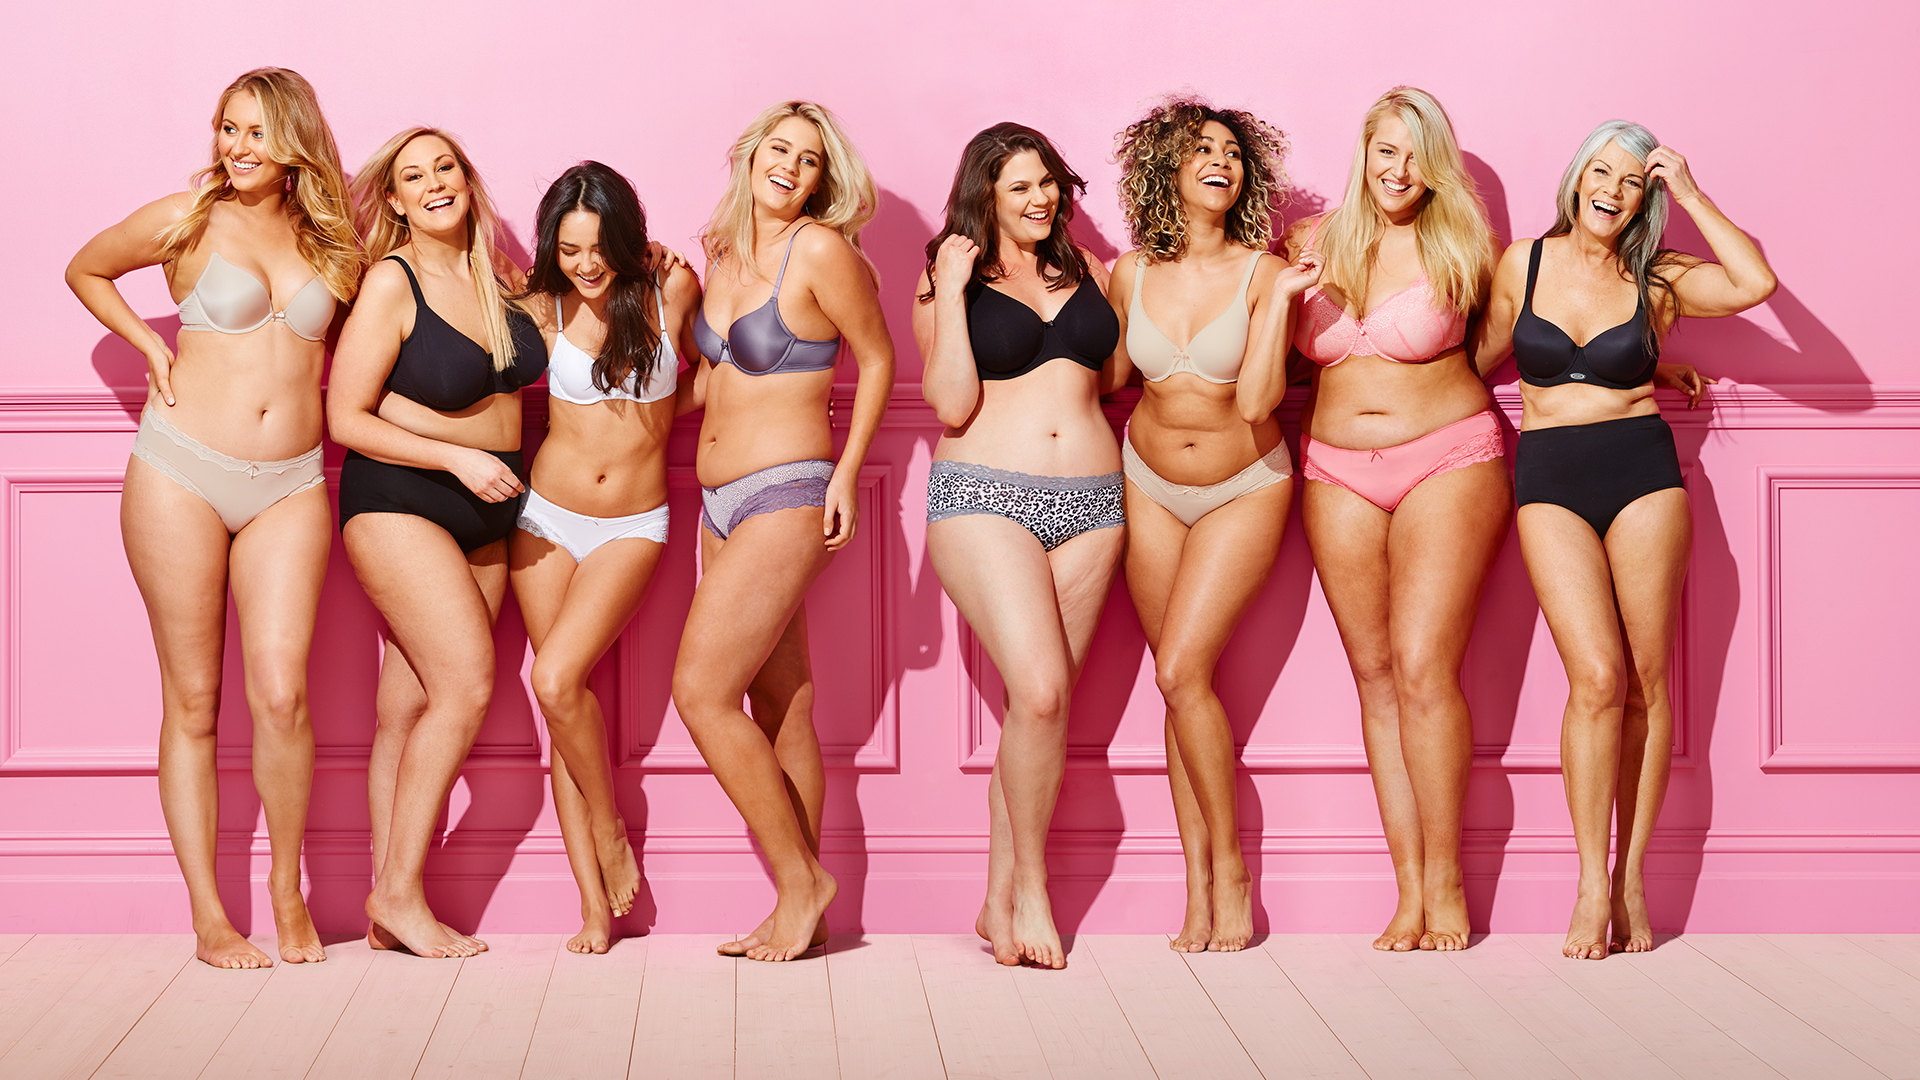 The Truth About What 'Average' Size 16 Women Look Like